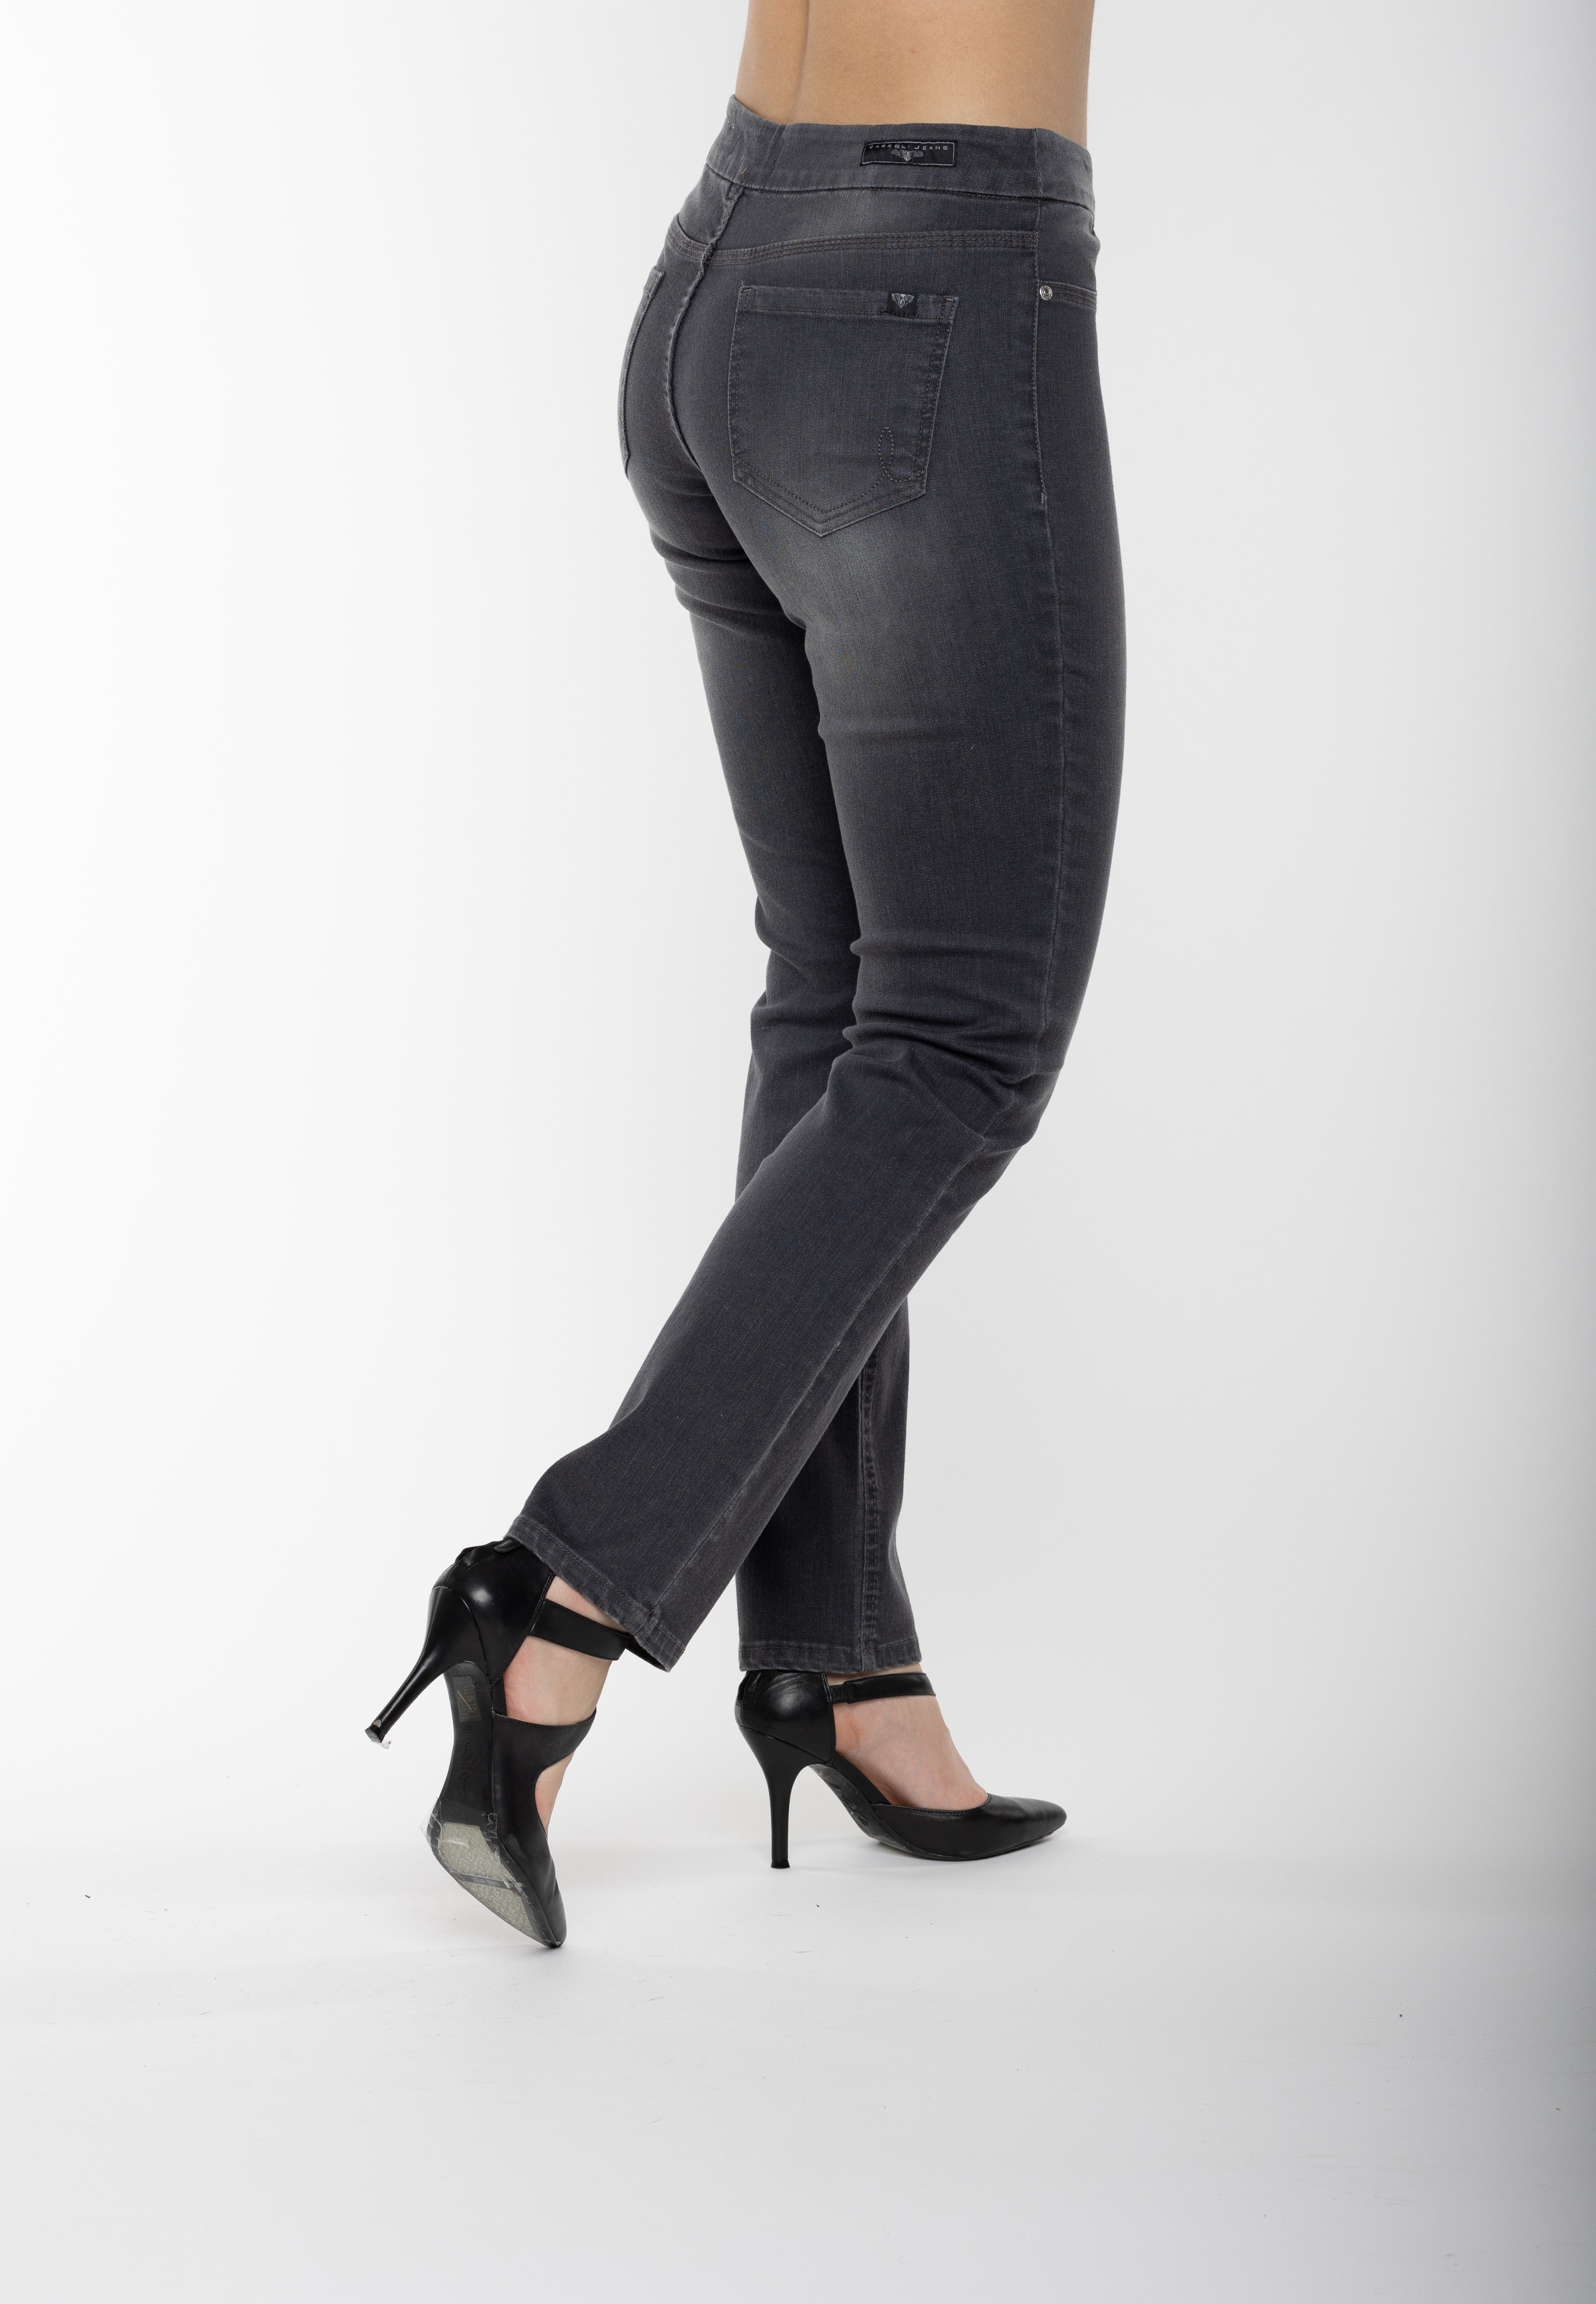 Carreli Jeans® | Angela in as Grey Pull-On Leg Wash Fit Straight